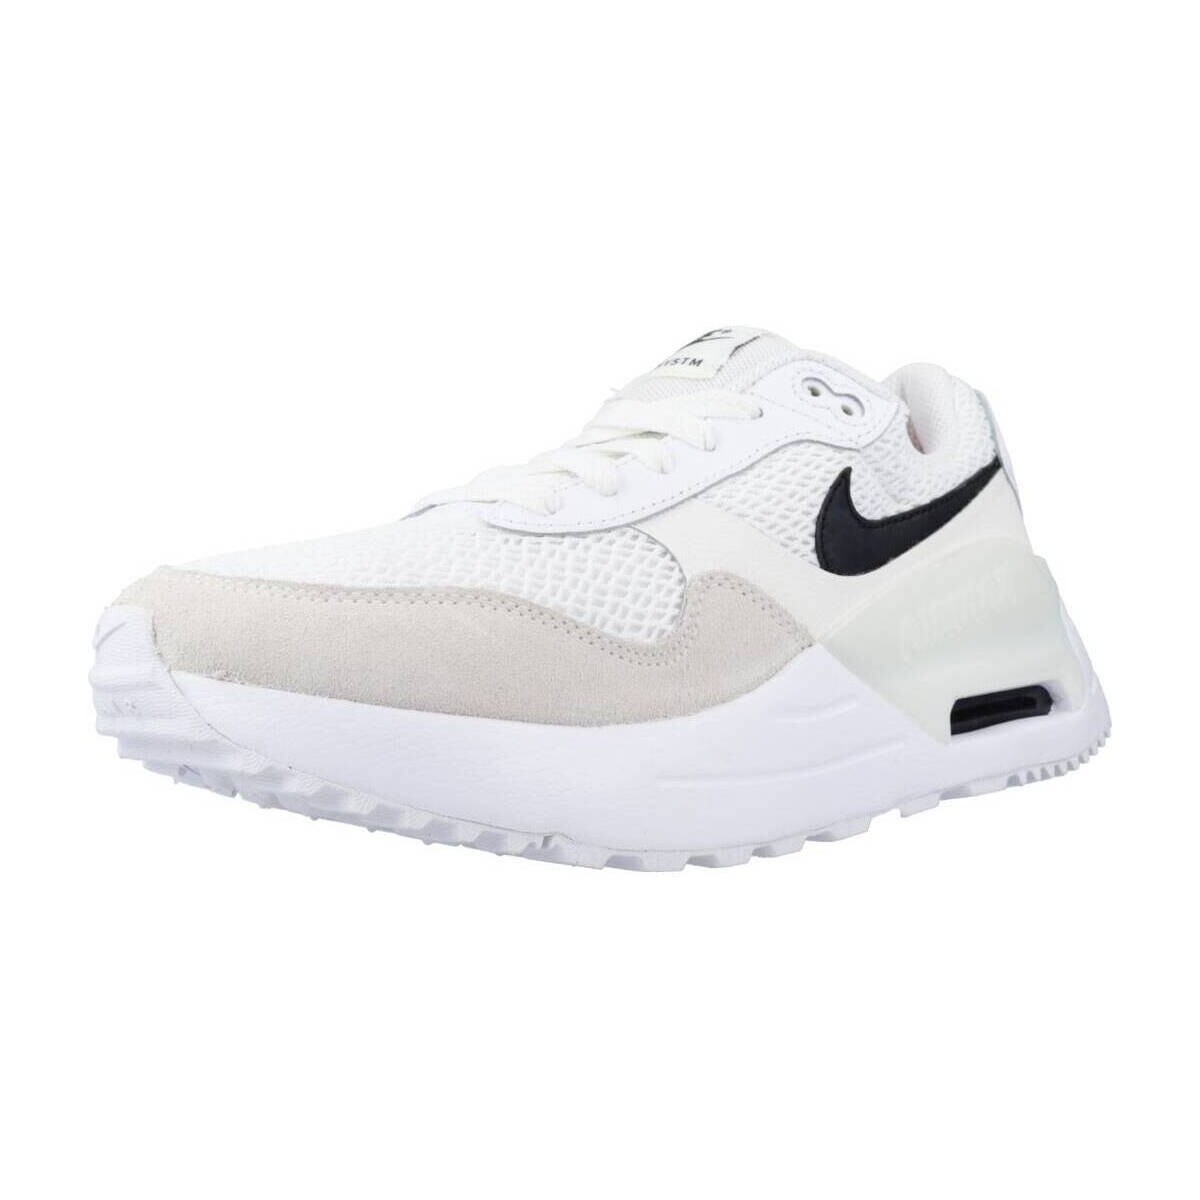 Scarpe Donna Sneakers Nike SYSTM Bianco